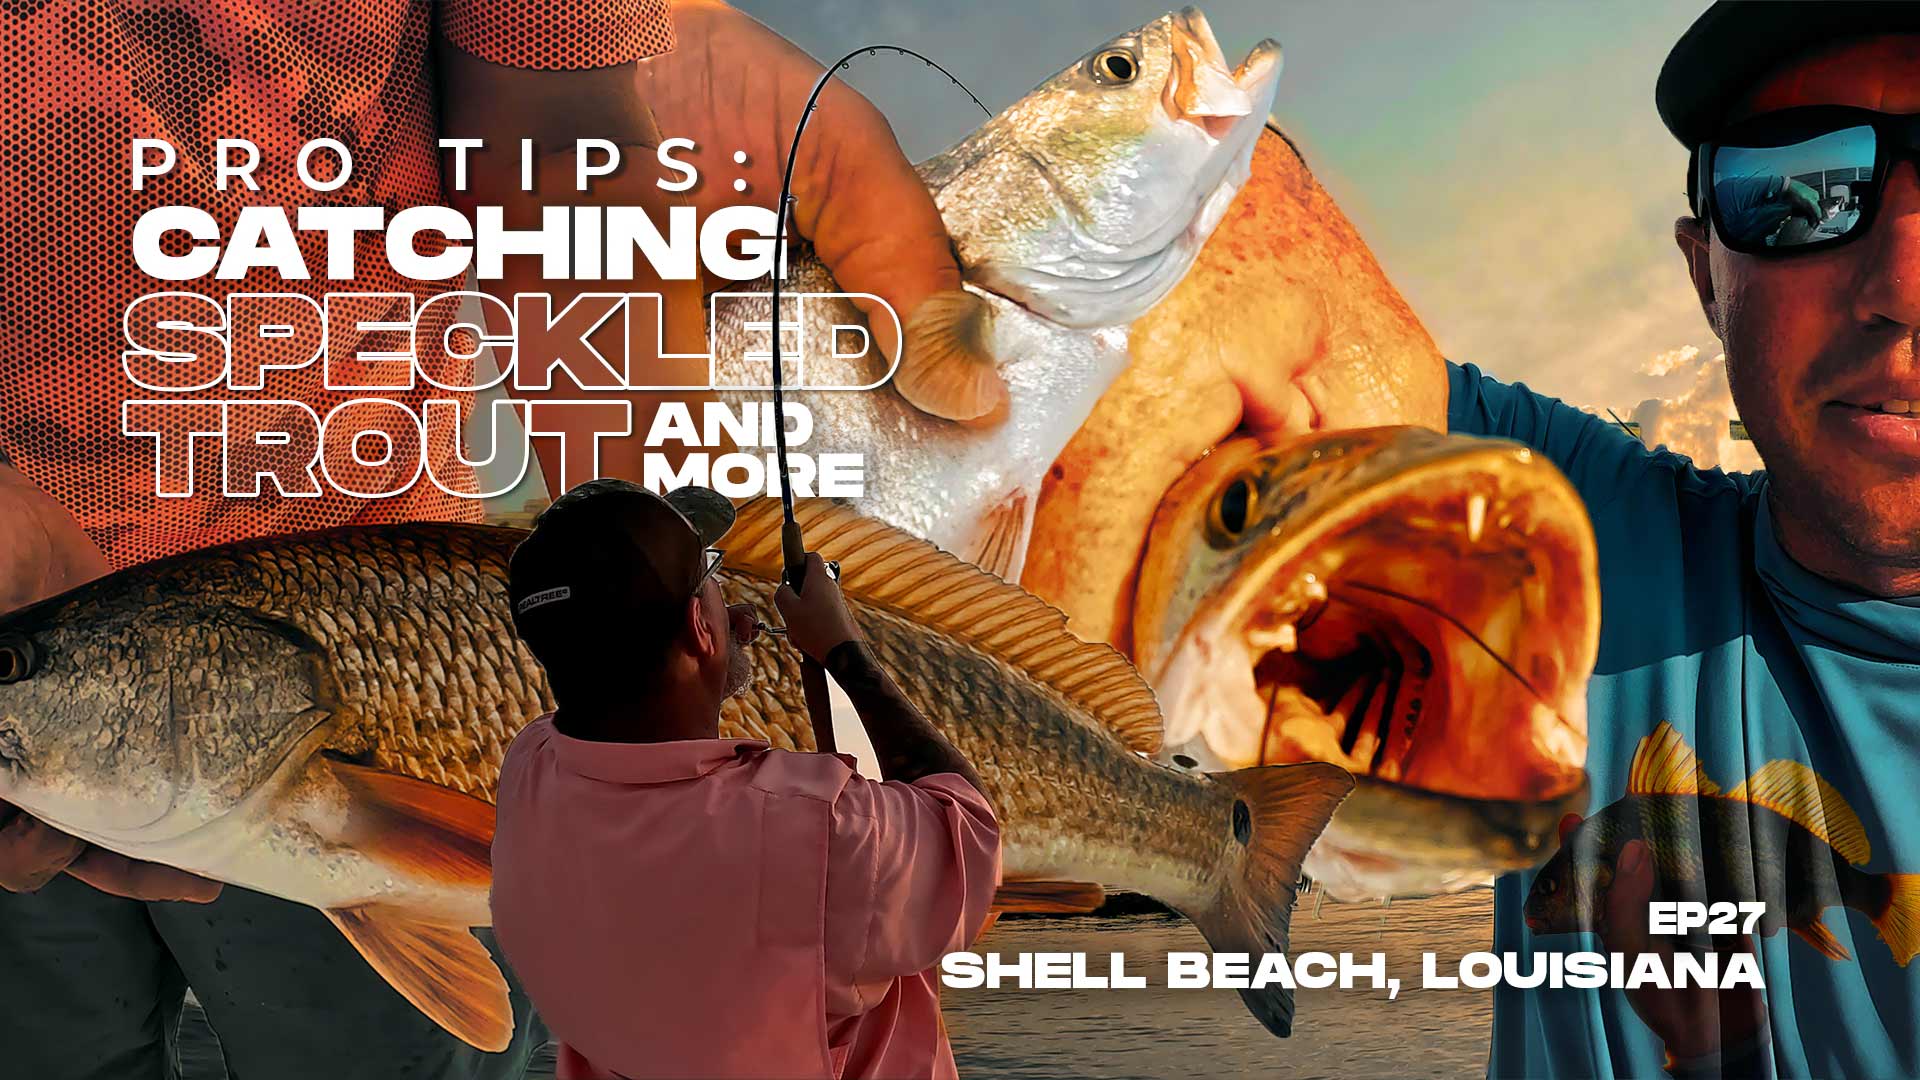 Catching Speckled Trout and More in Shell Beach Louisiana